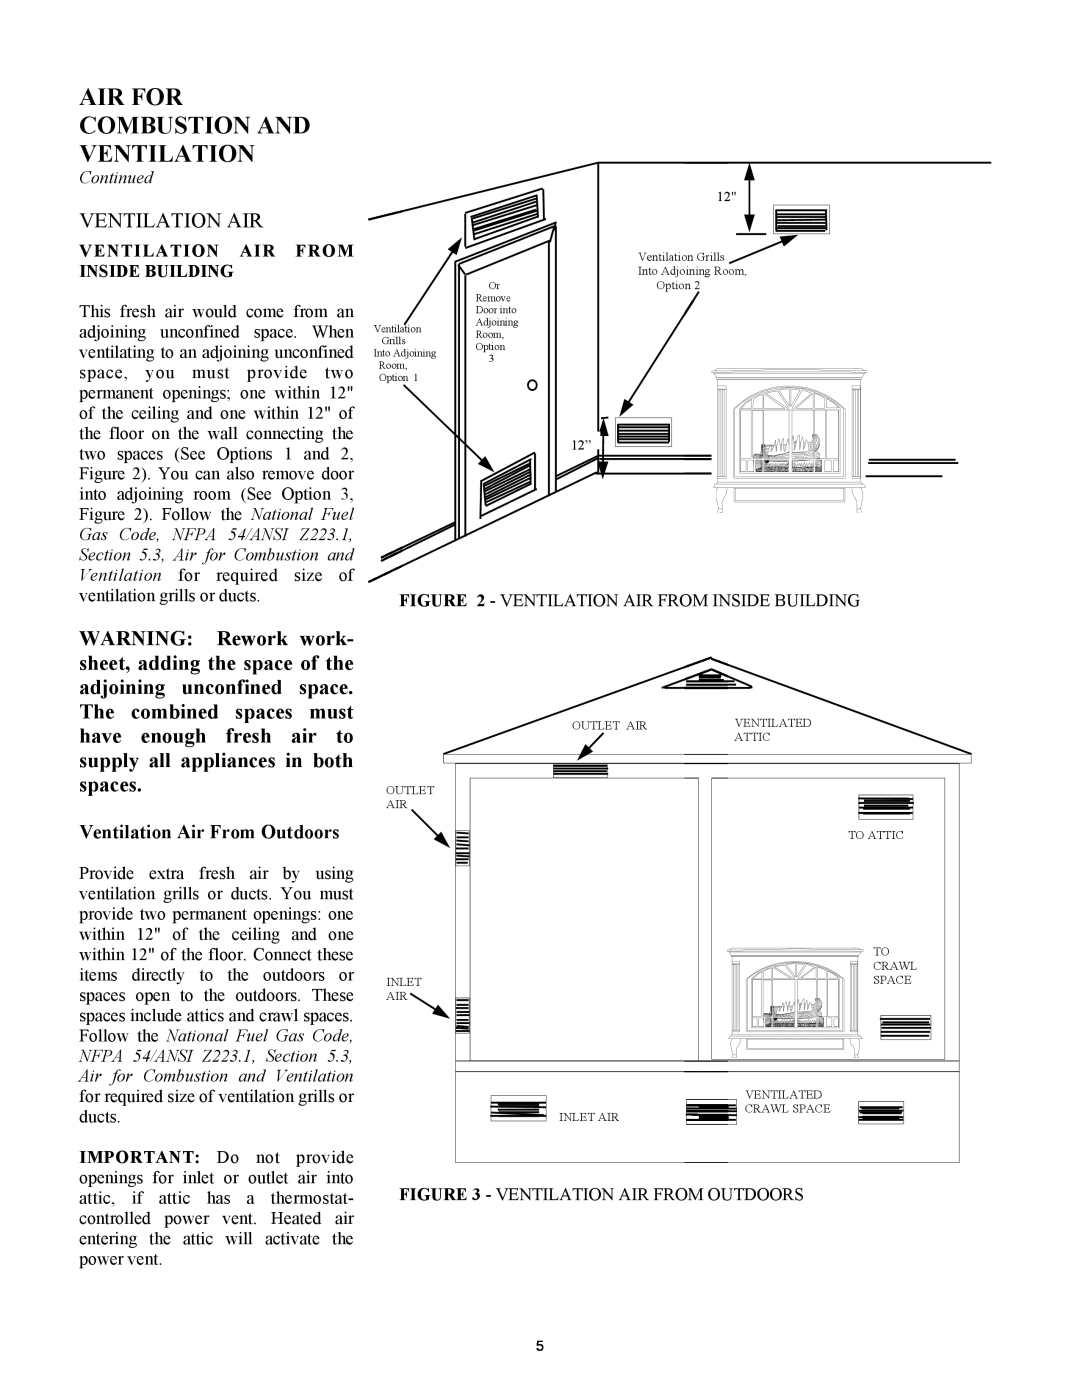 New Buck Corporation GAS STOVE HEATER installation manual Ventilation Air From Outdoors, Continued 